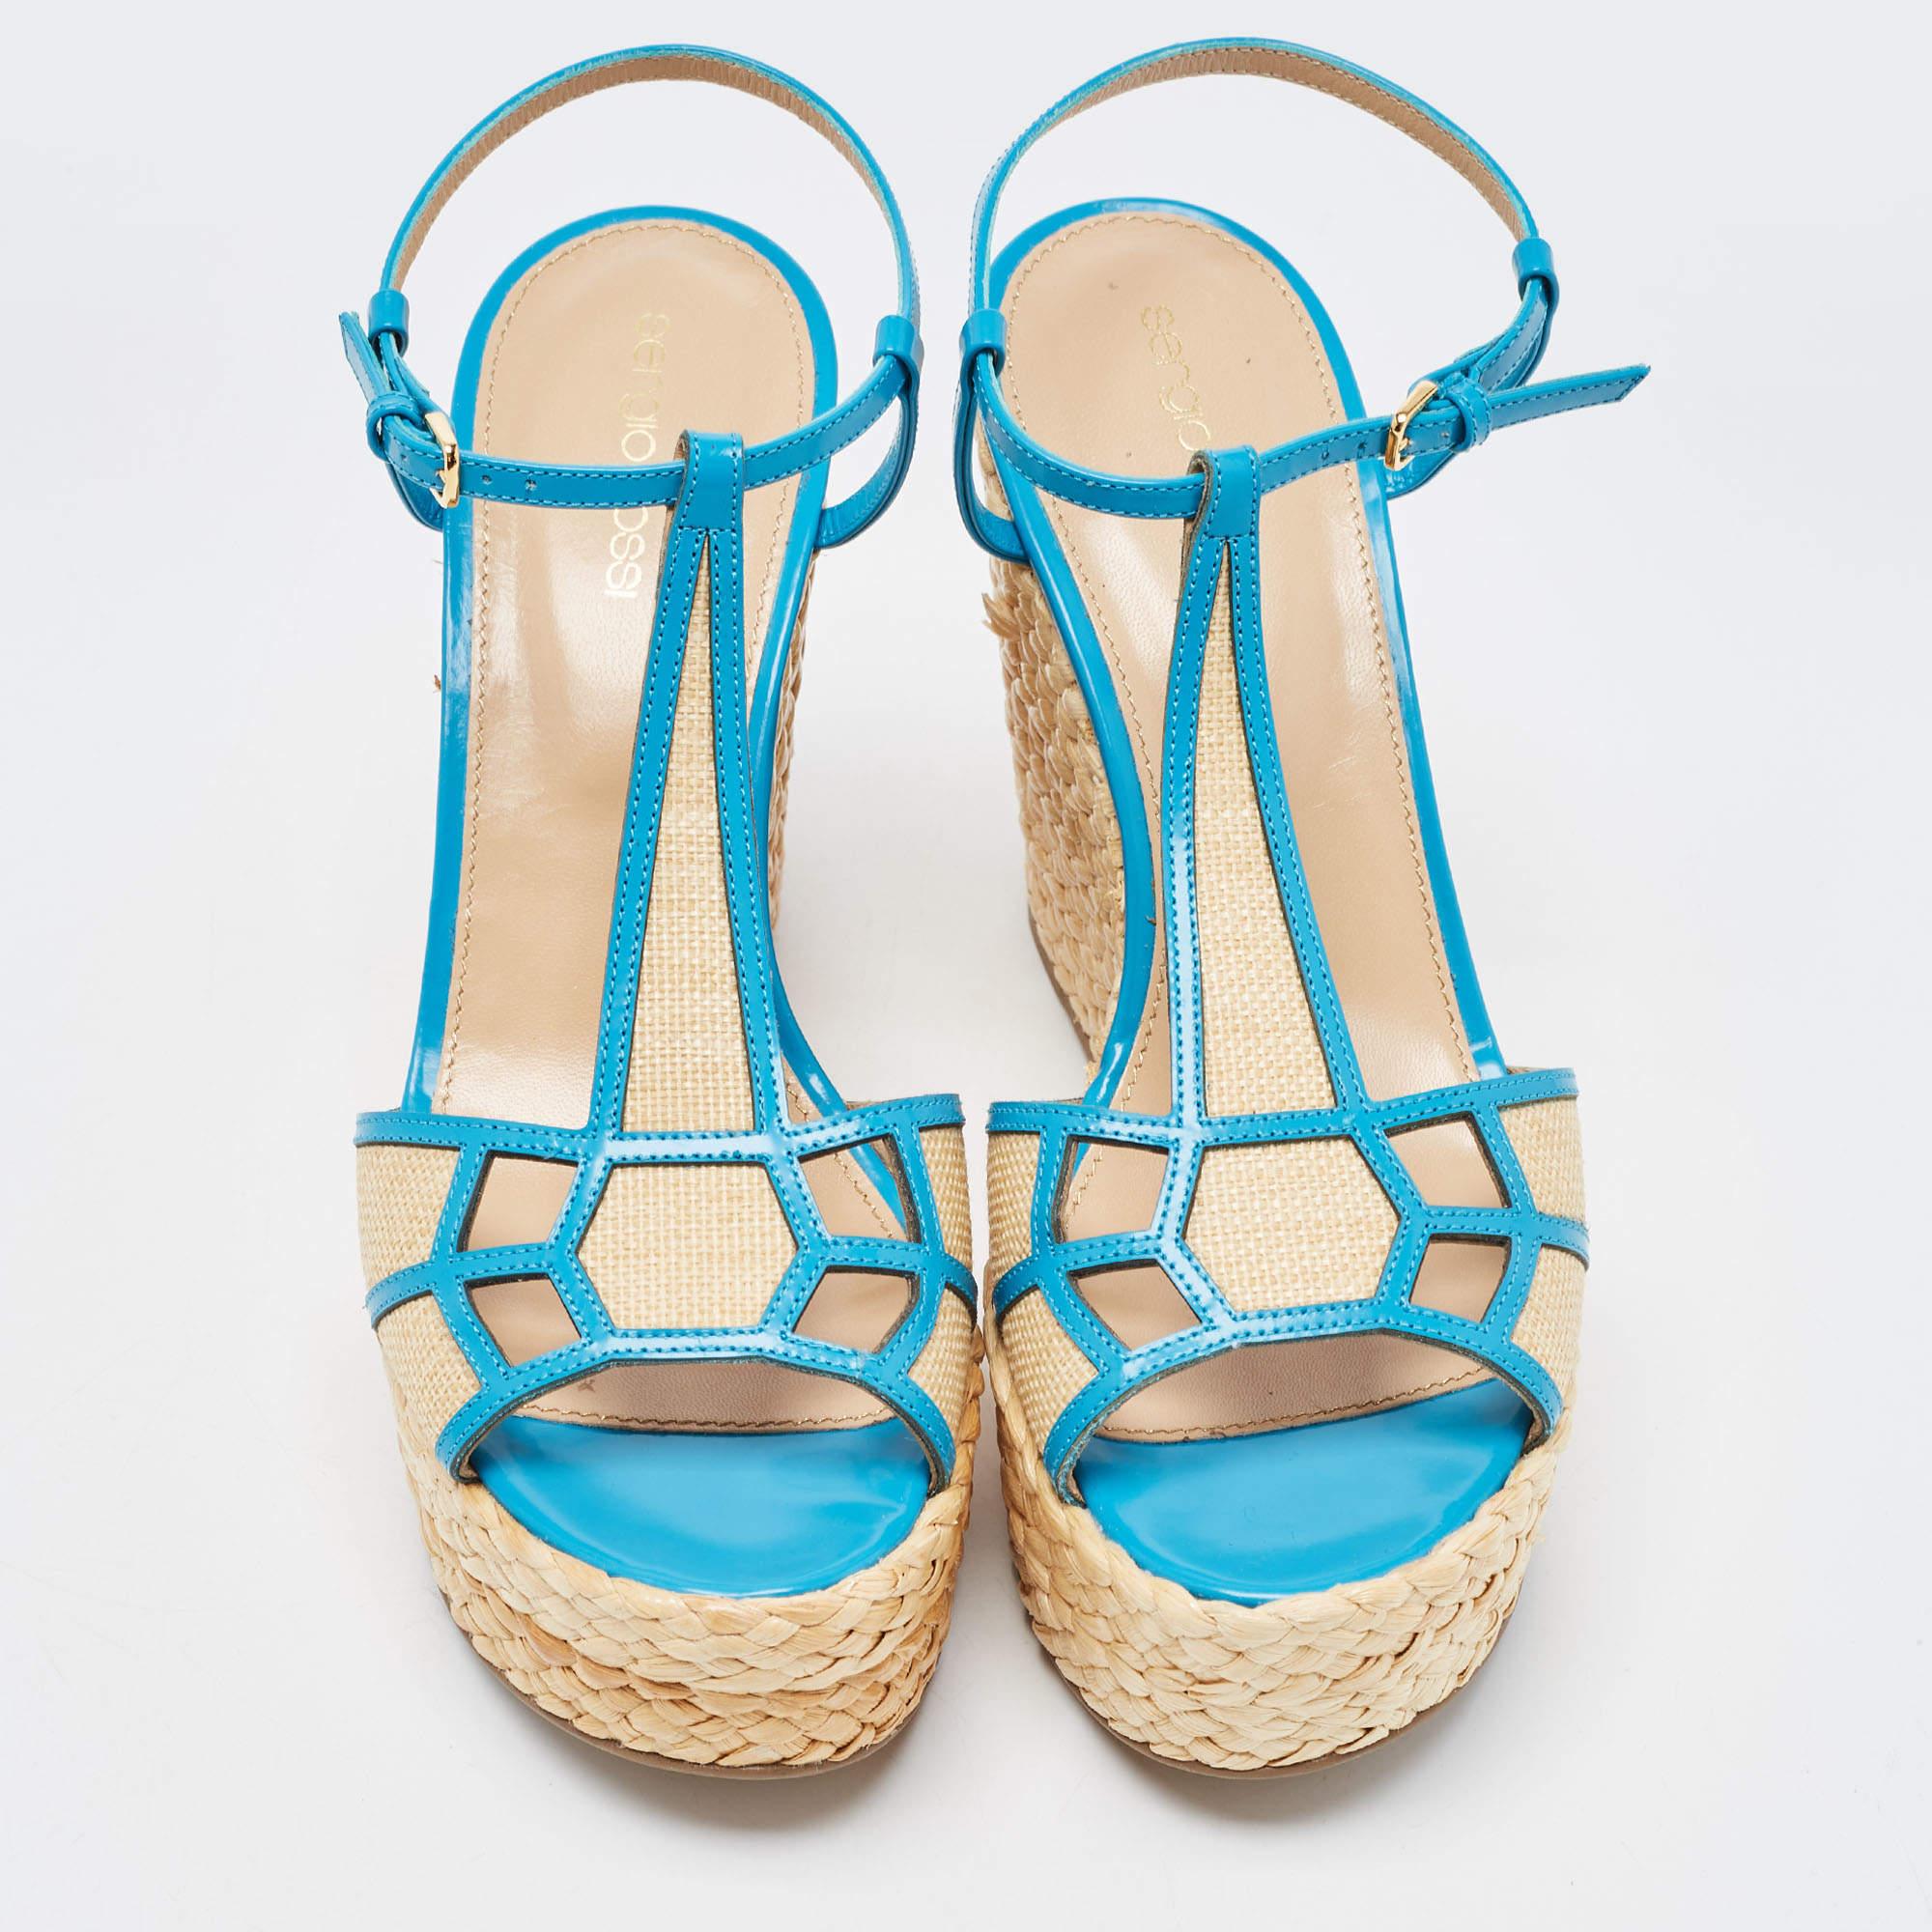 You can count on these designer sandals to complete a summer look. They are crafted beautifully and designed to offer the right fit and a comfortable lift.

Includes: Original Dustbag

